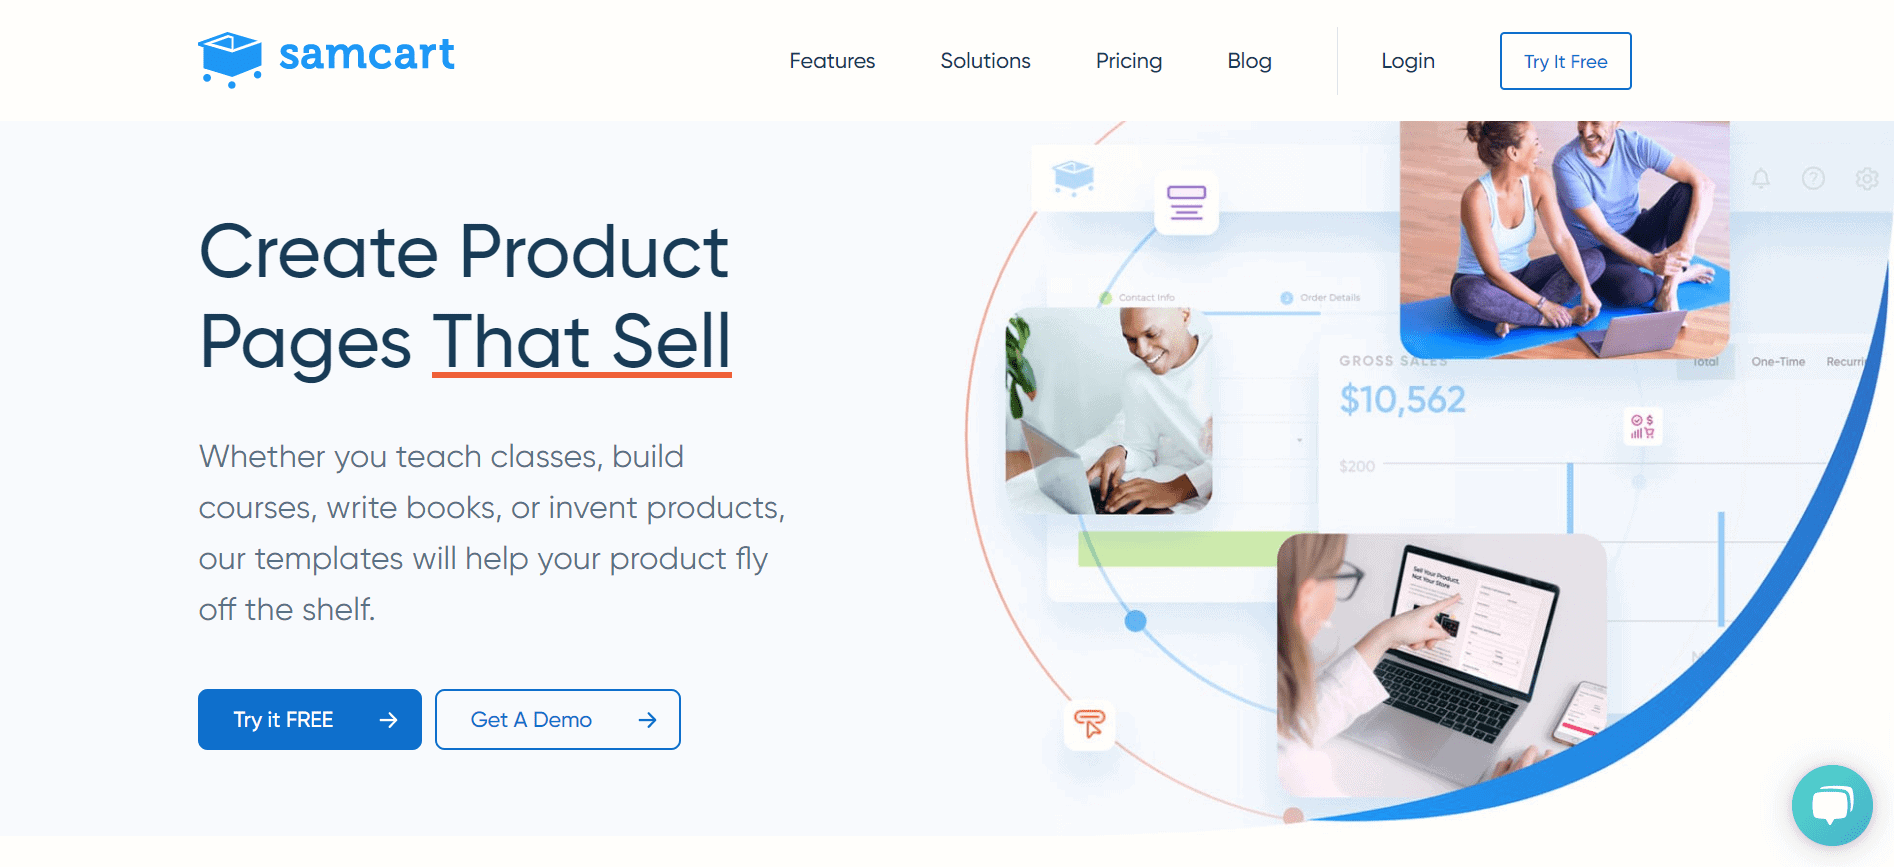 SamCart-The-First-and-Only-Direct-To-Consumer-eCommerce-Platform